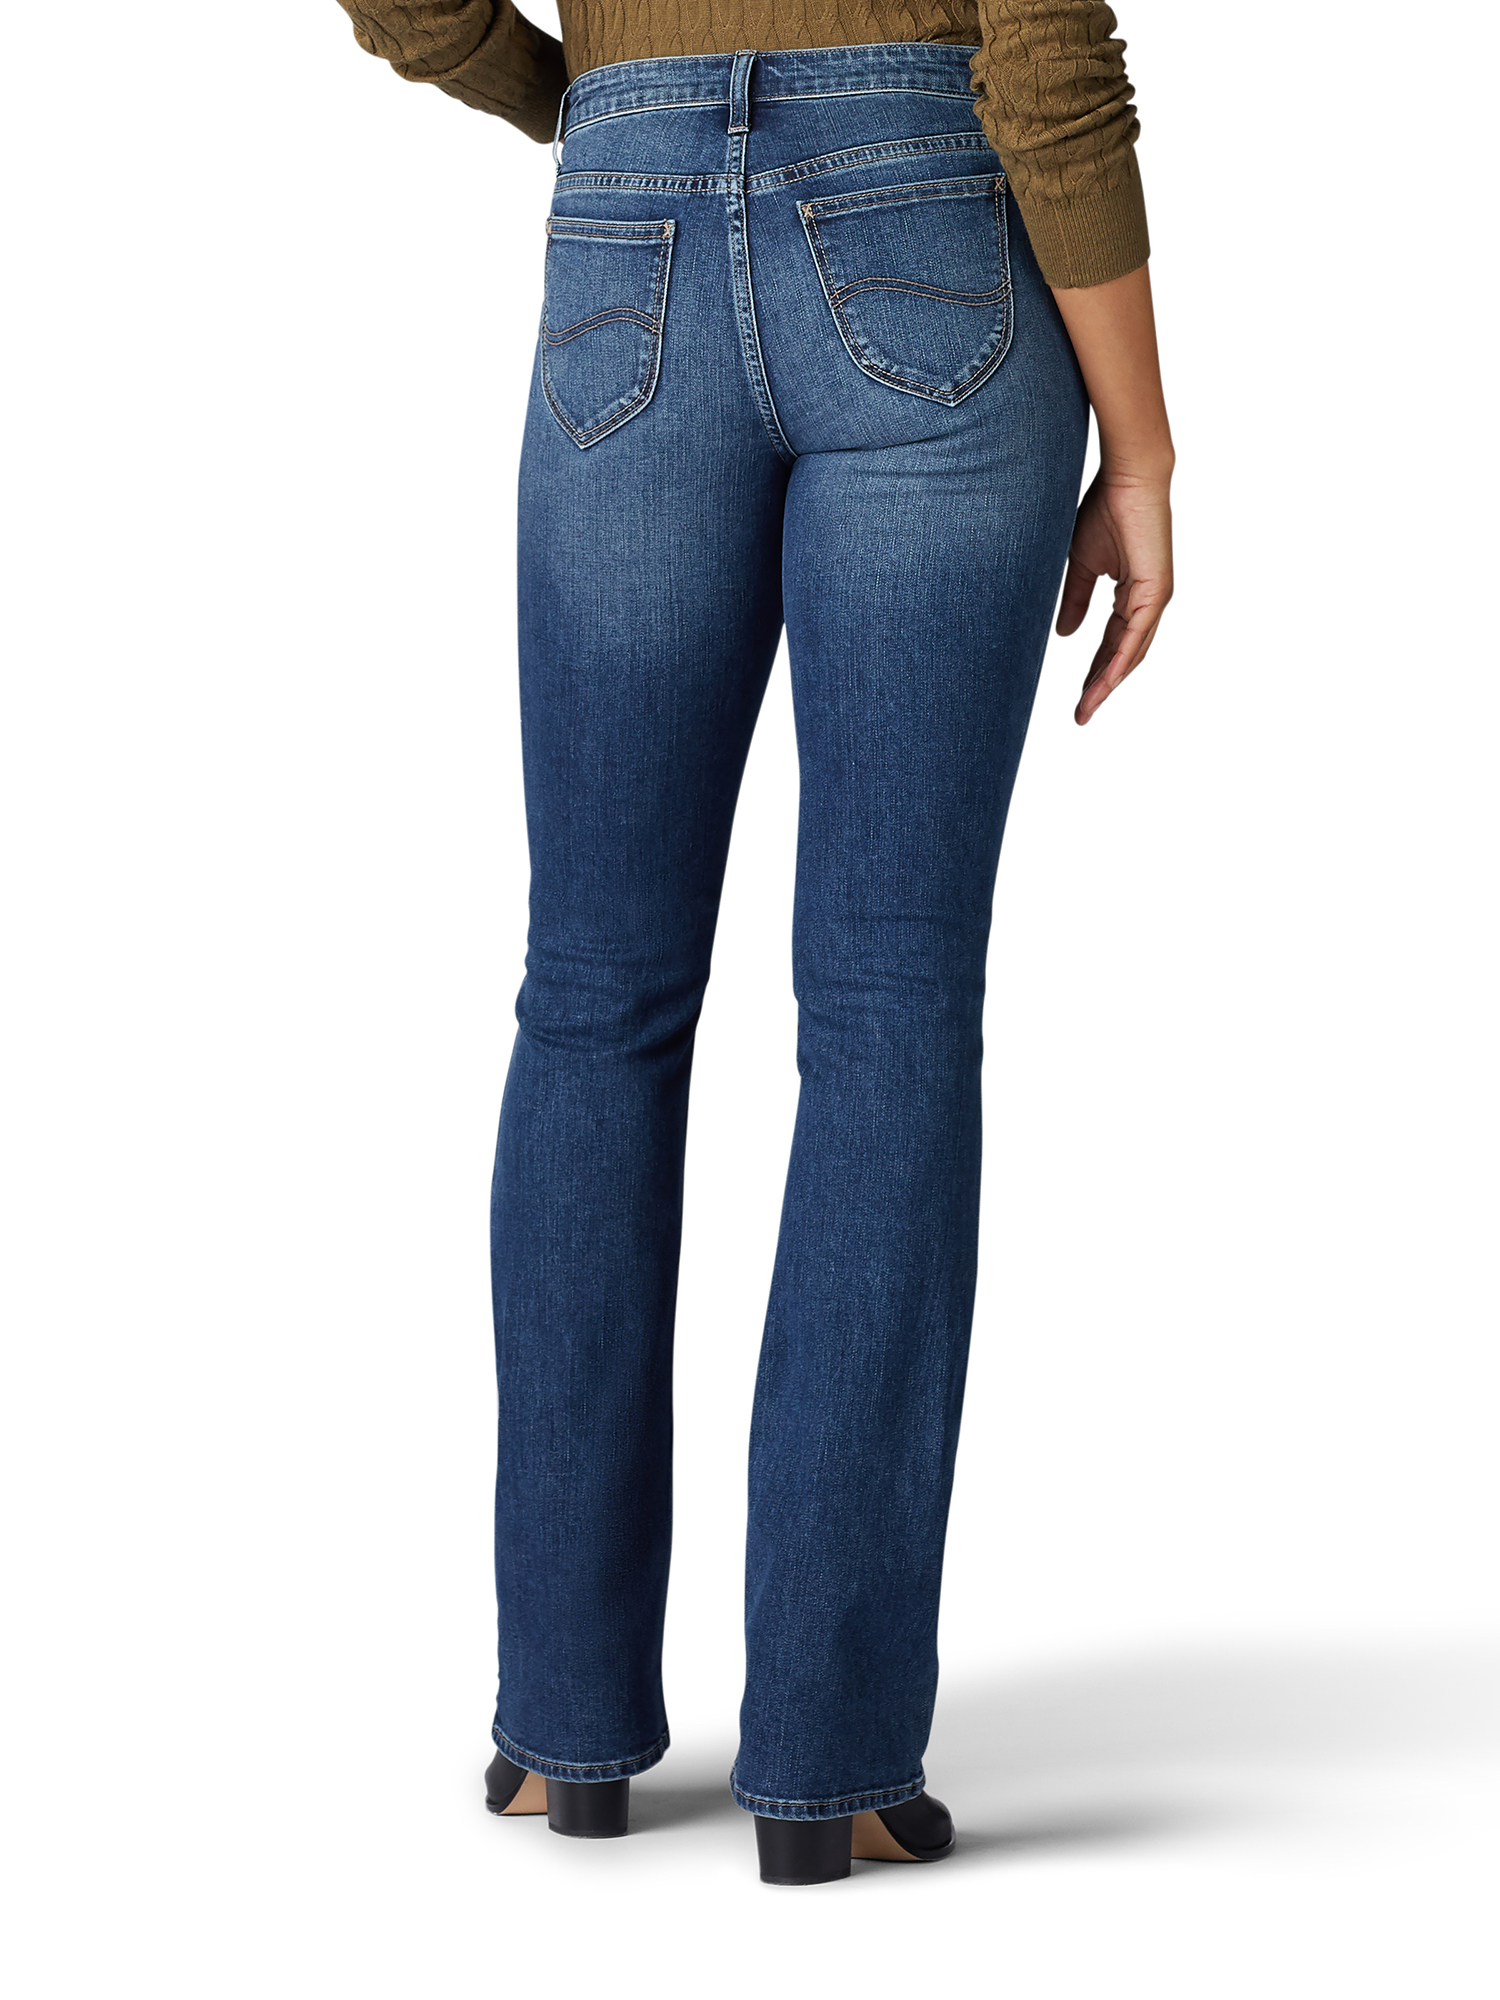 Lee Riders Women's Midrise Bootcut Jean - image 5 of 5